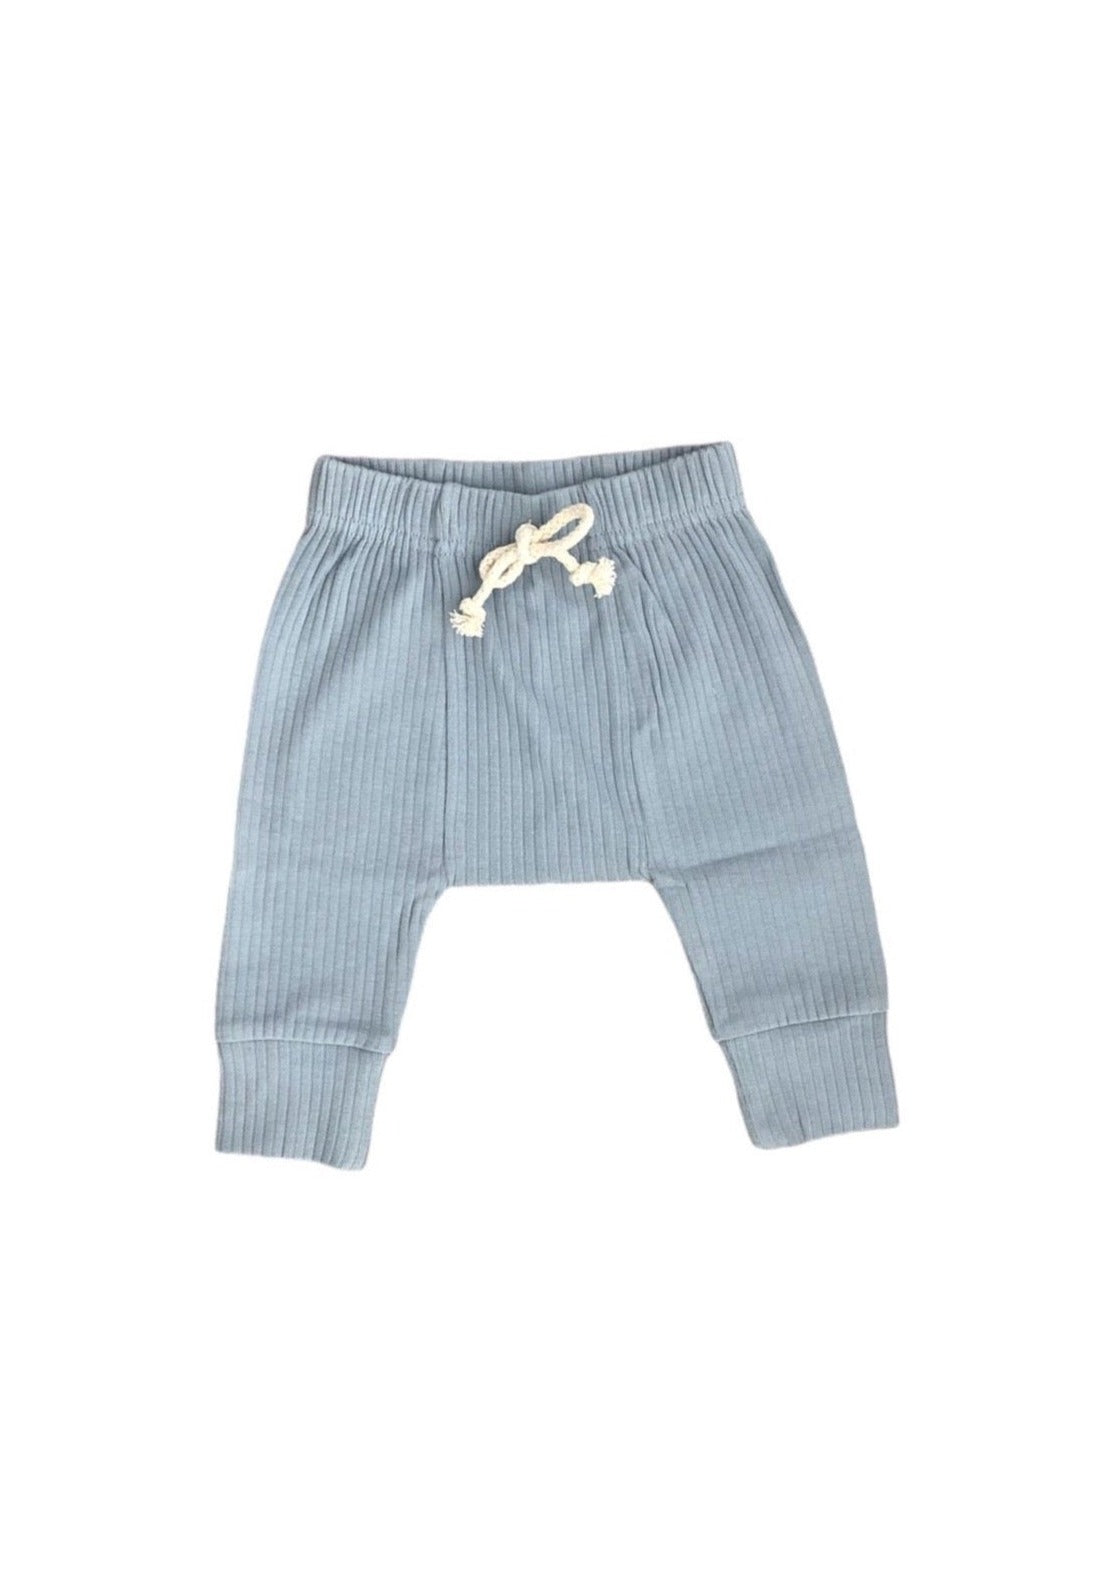 RIBBED LOUNGE PANT IN BABY BLUE – SOVA